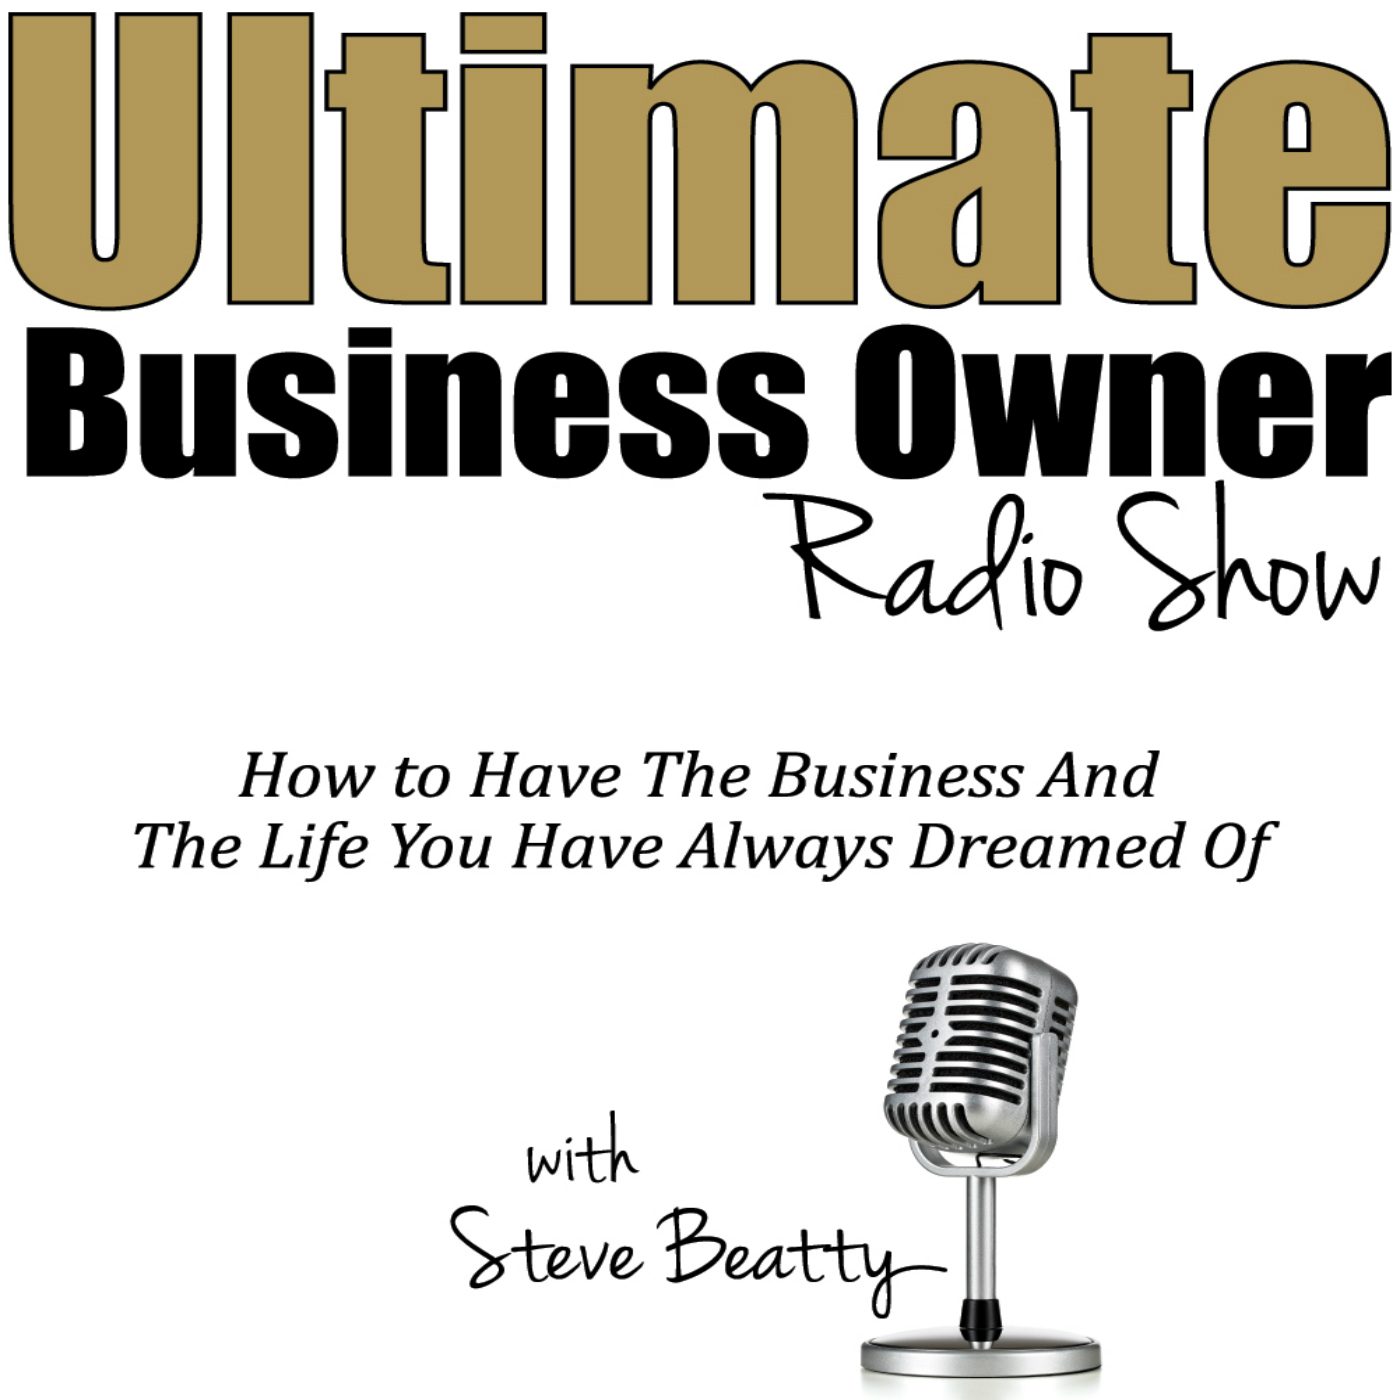 Ulitmate Business INTERVIEW: Successful Business Transitions (20m) Leland Pace